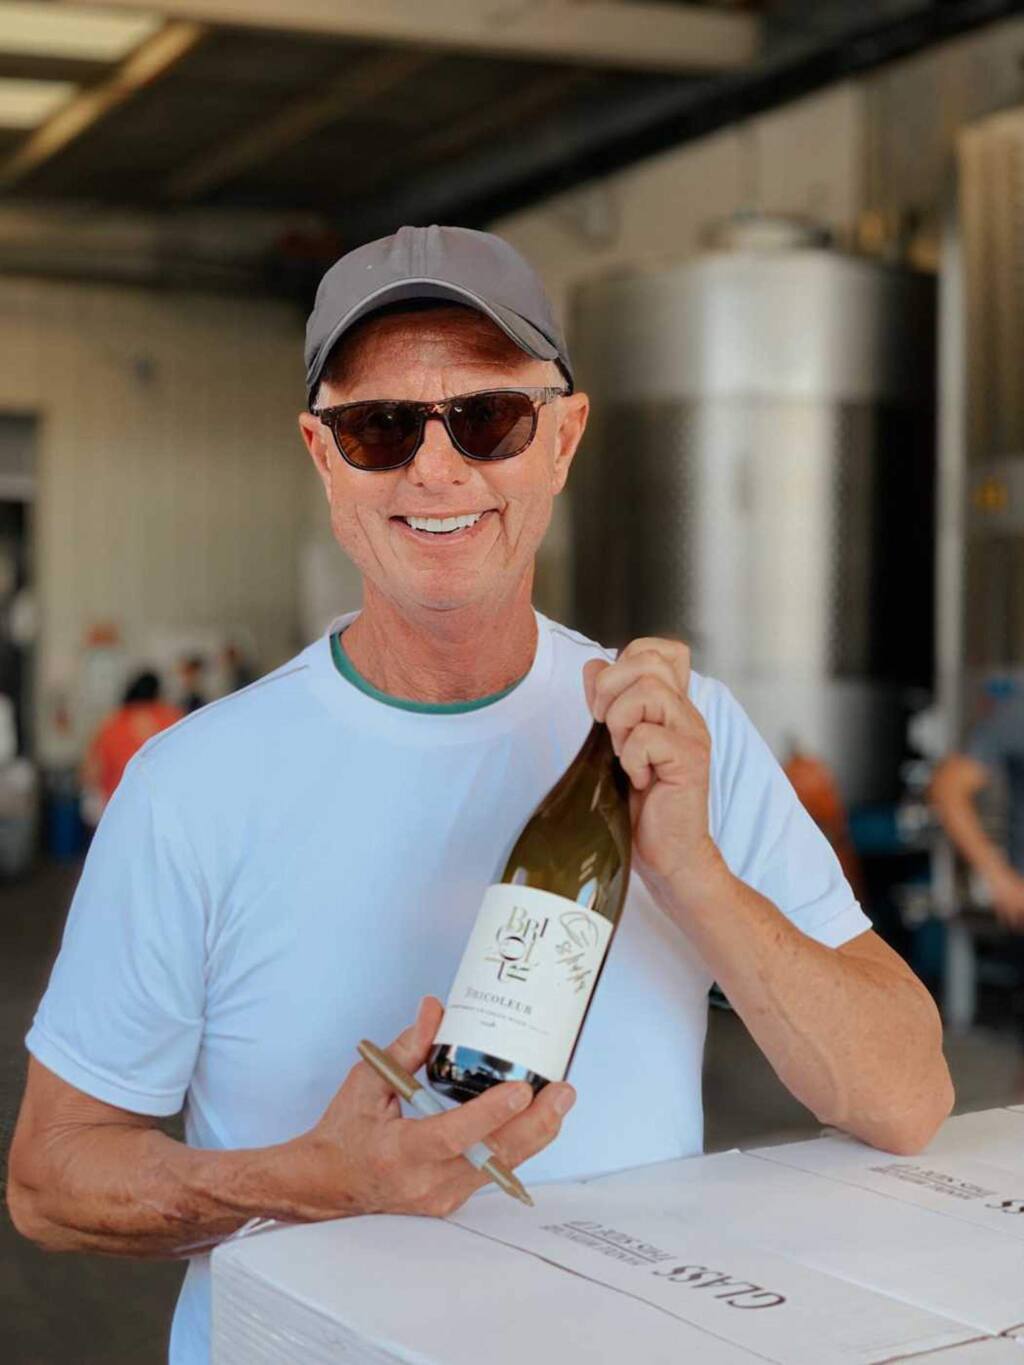 Cary Gott is the fourth generation in a family of California winemakers. Now Gott consults for wineries such as Davis Estates and Lawer Estates in Calistoga and makes wine at Bricoleur Vineyards. (bricoleurvineyards.com)